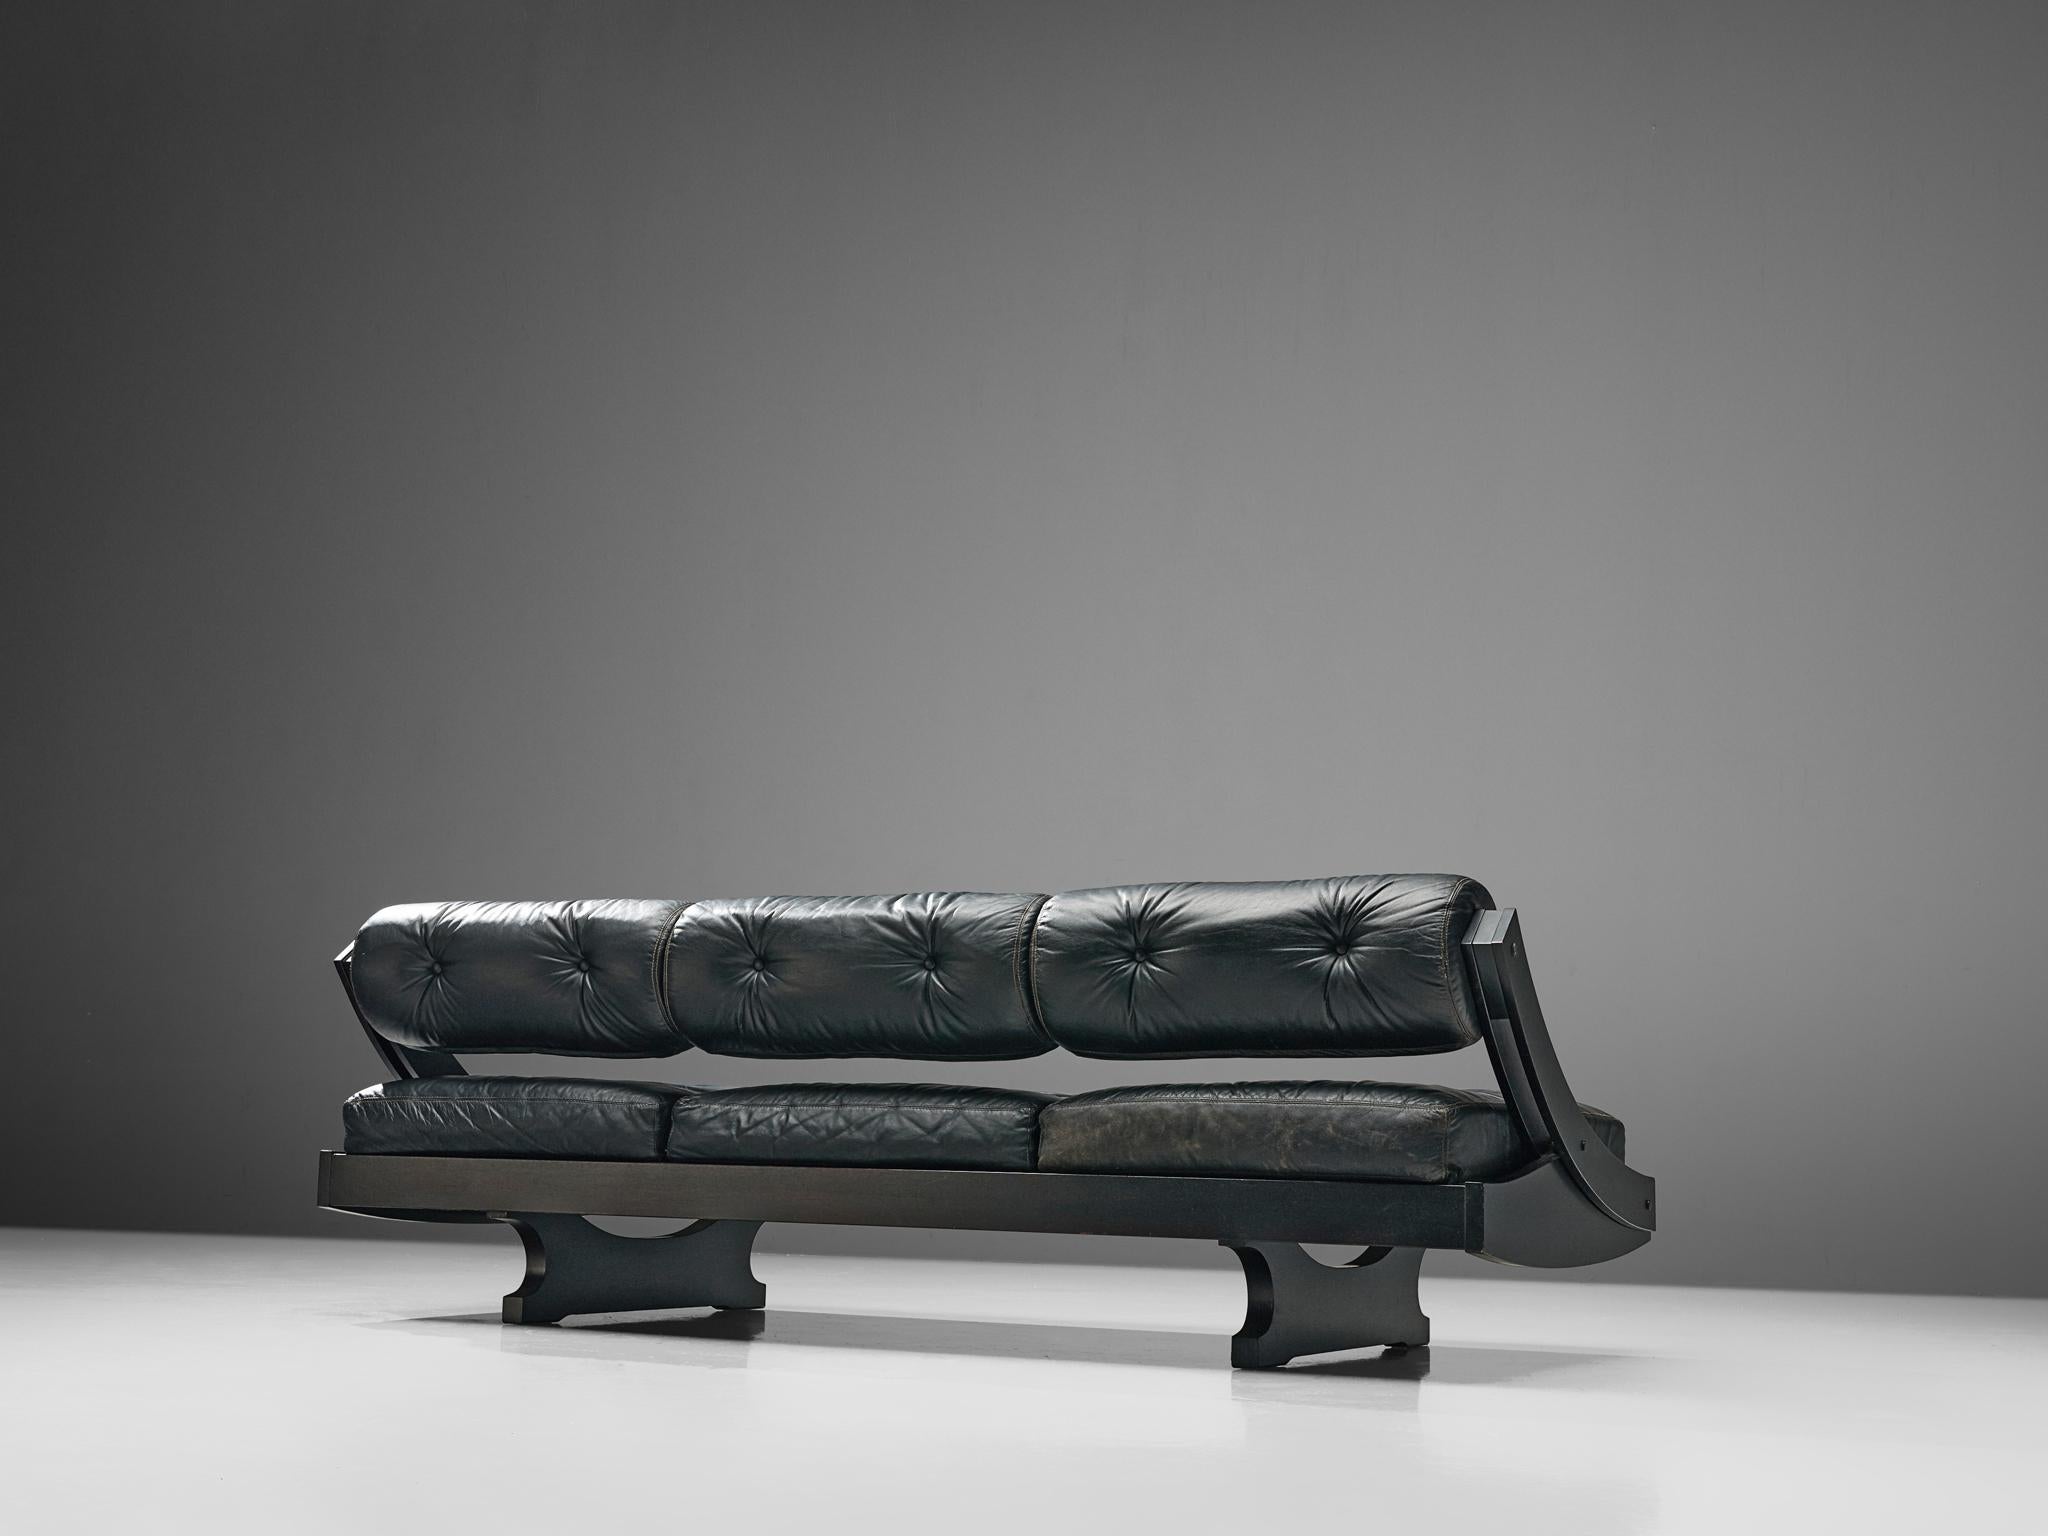 Woodwork 'GS-195' Sofa by Gianni Songia